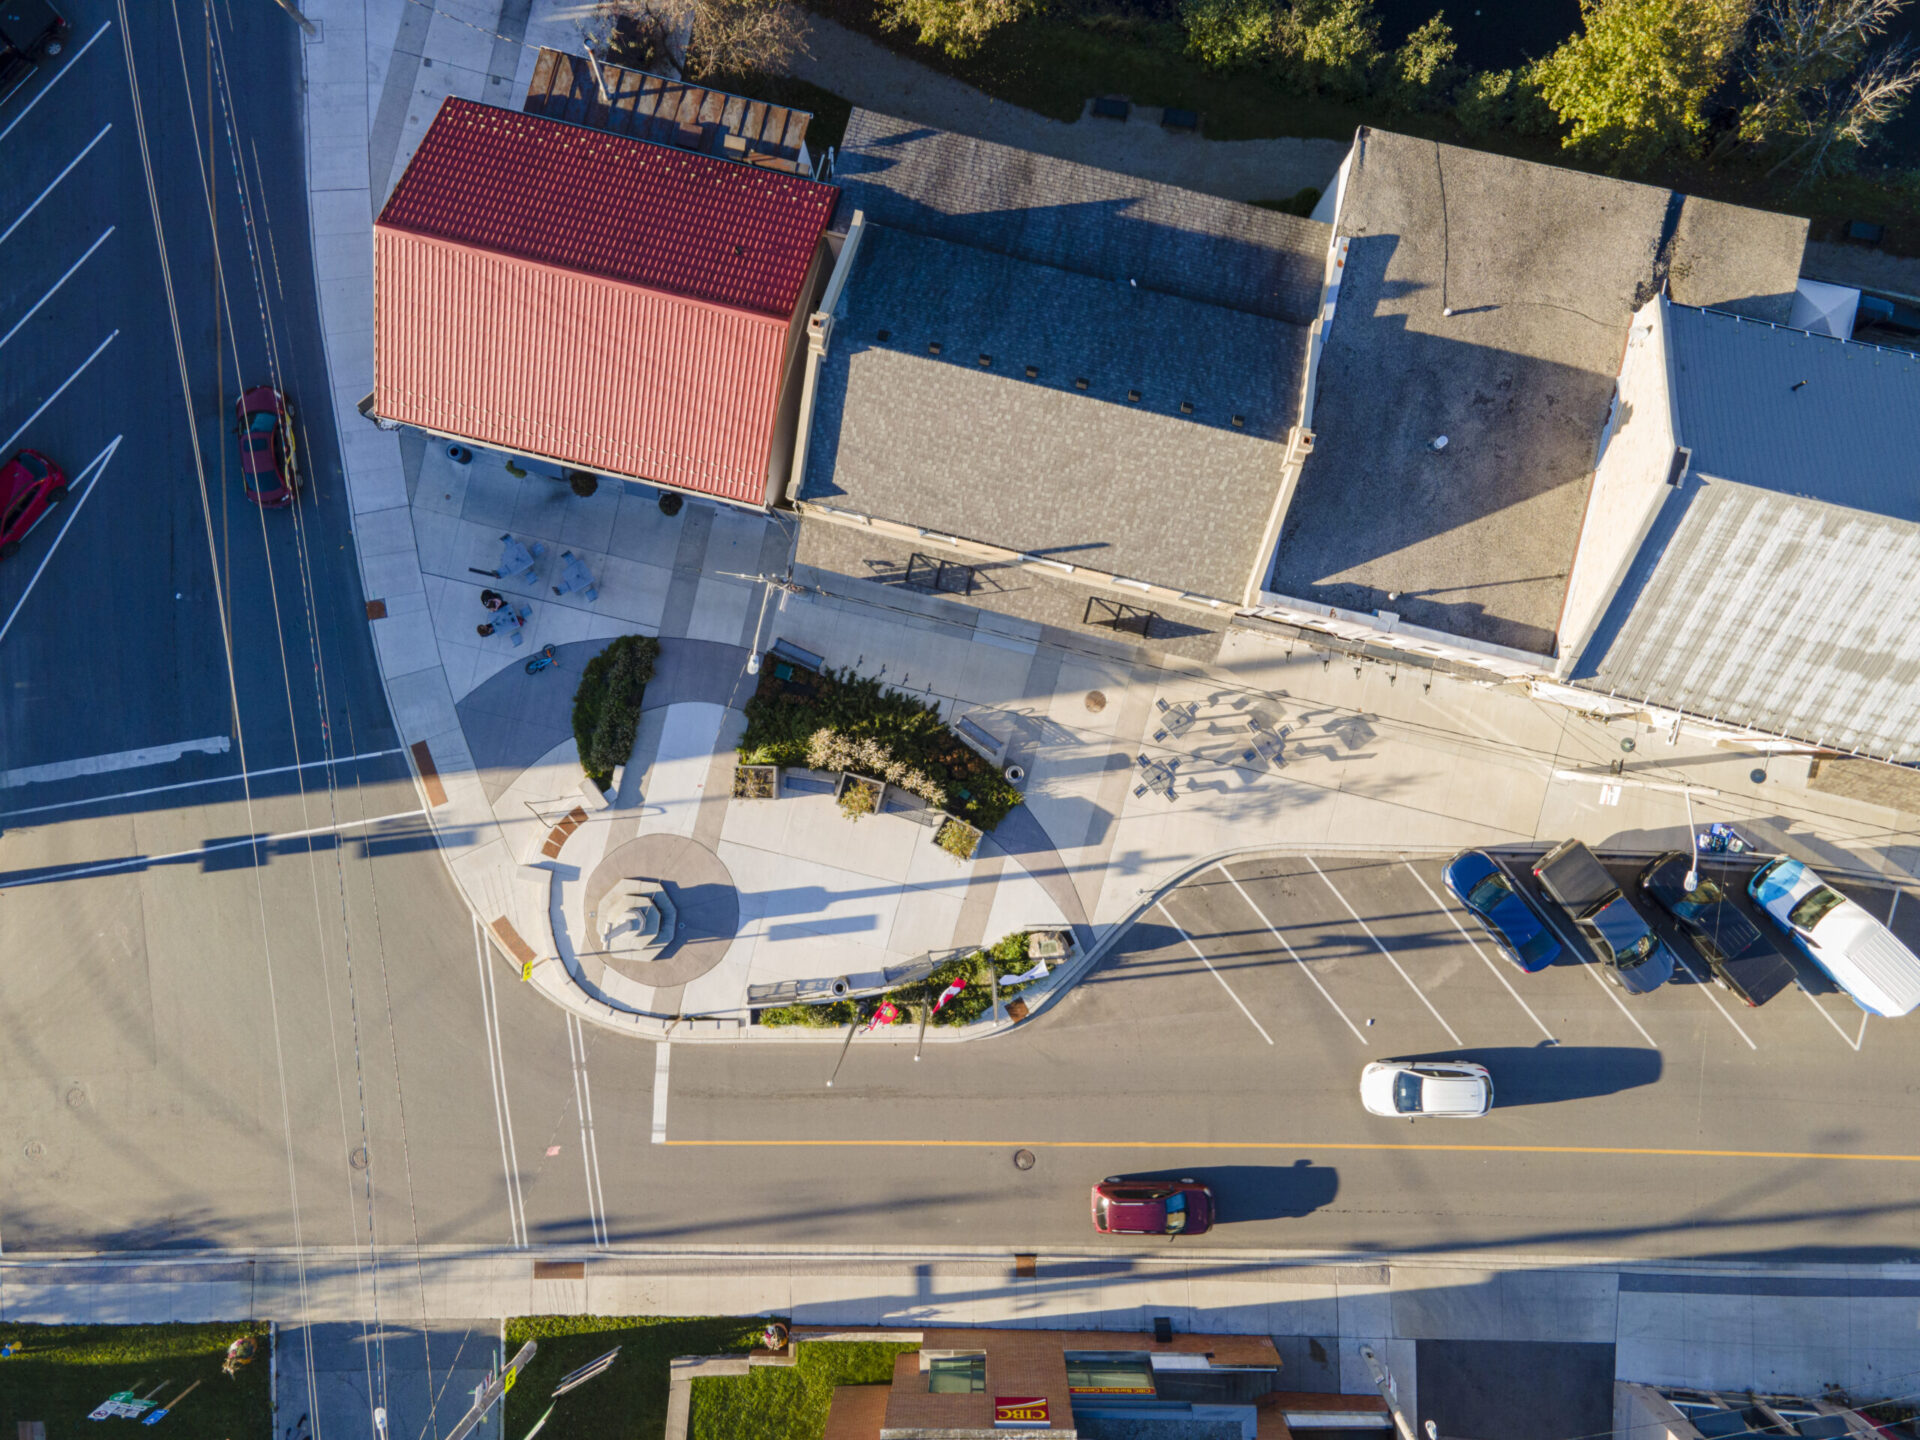 An aerial view of an engineered street with parked cars on it.